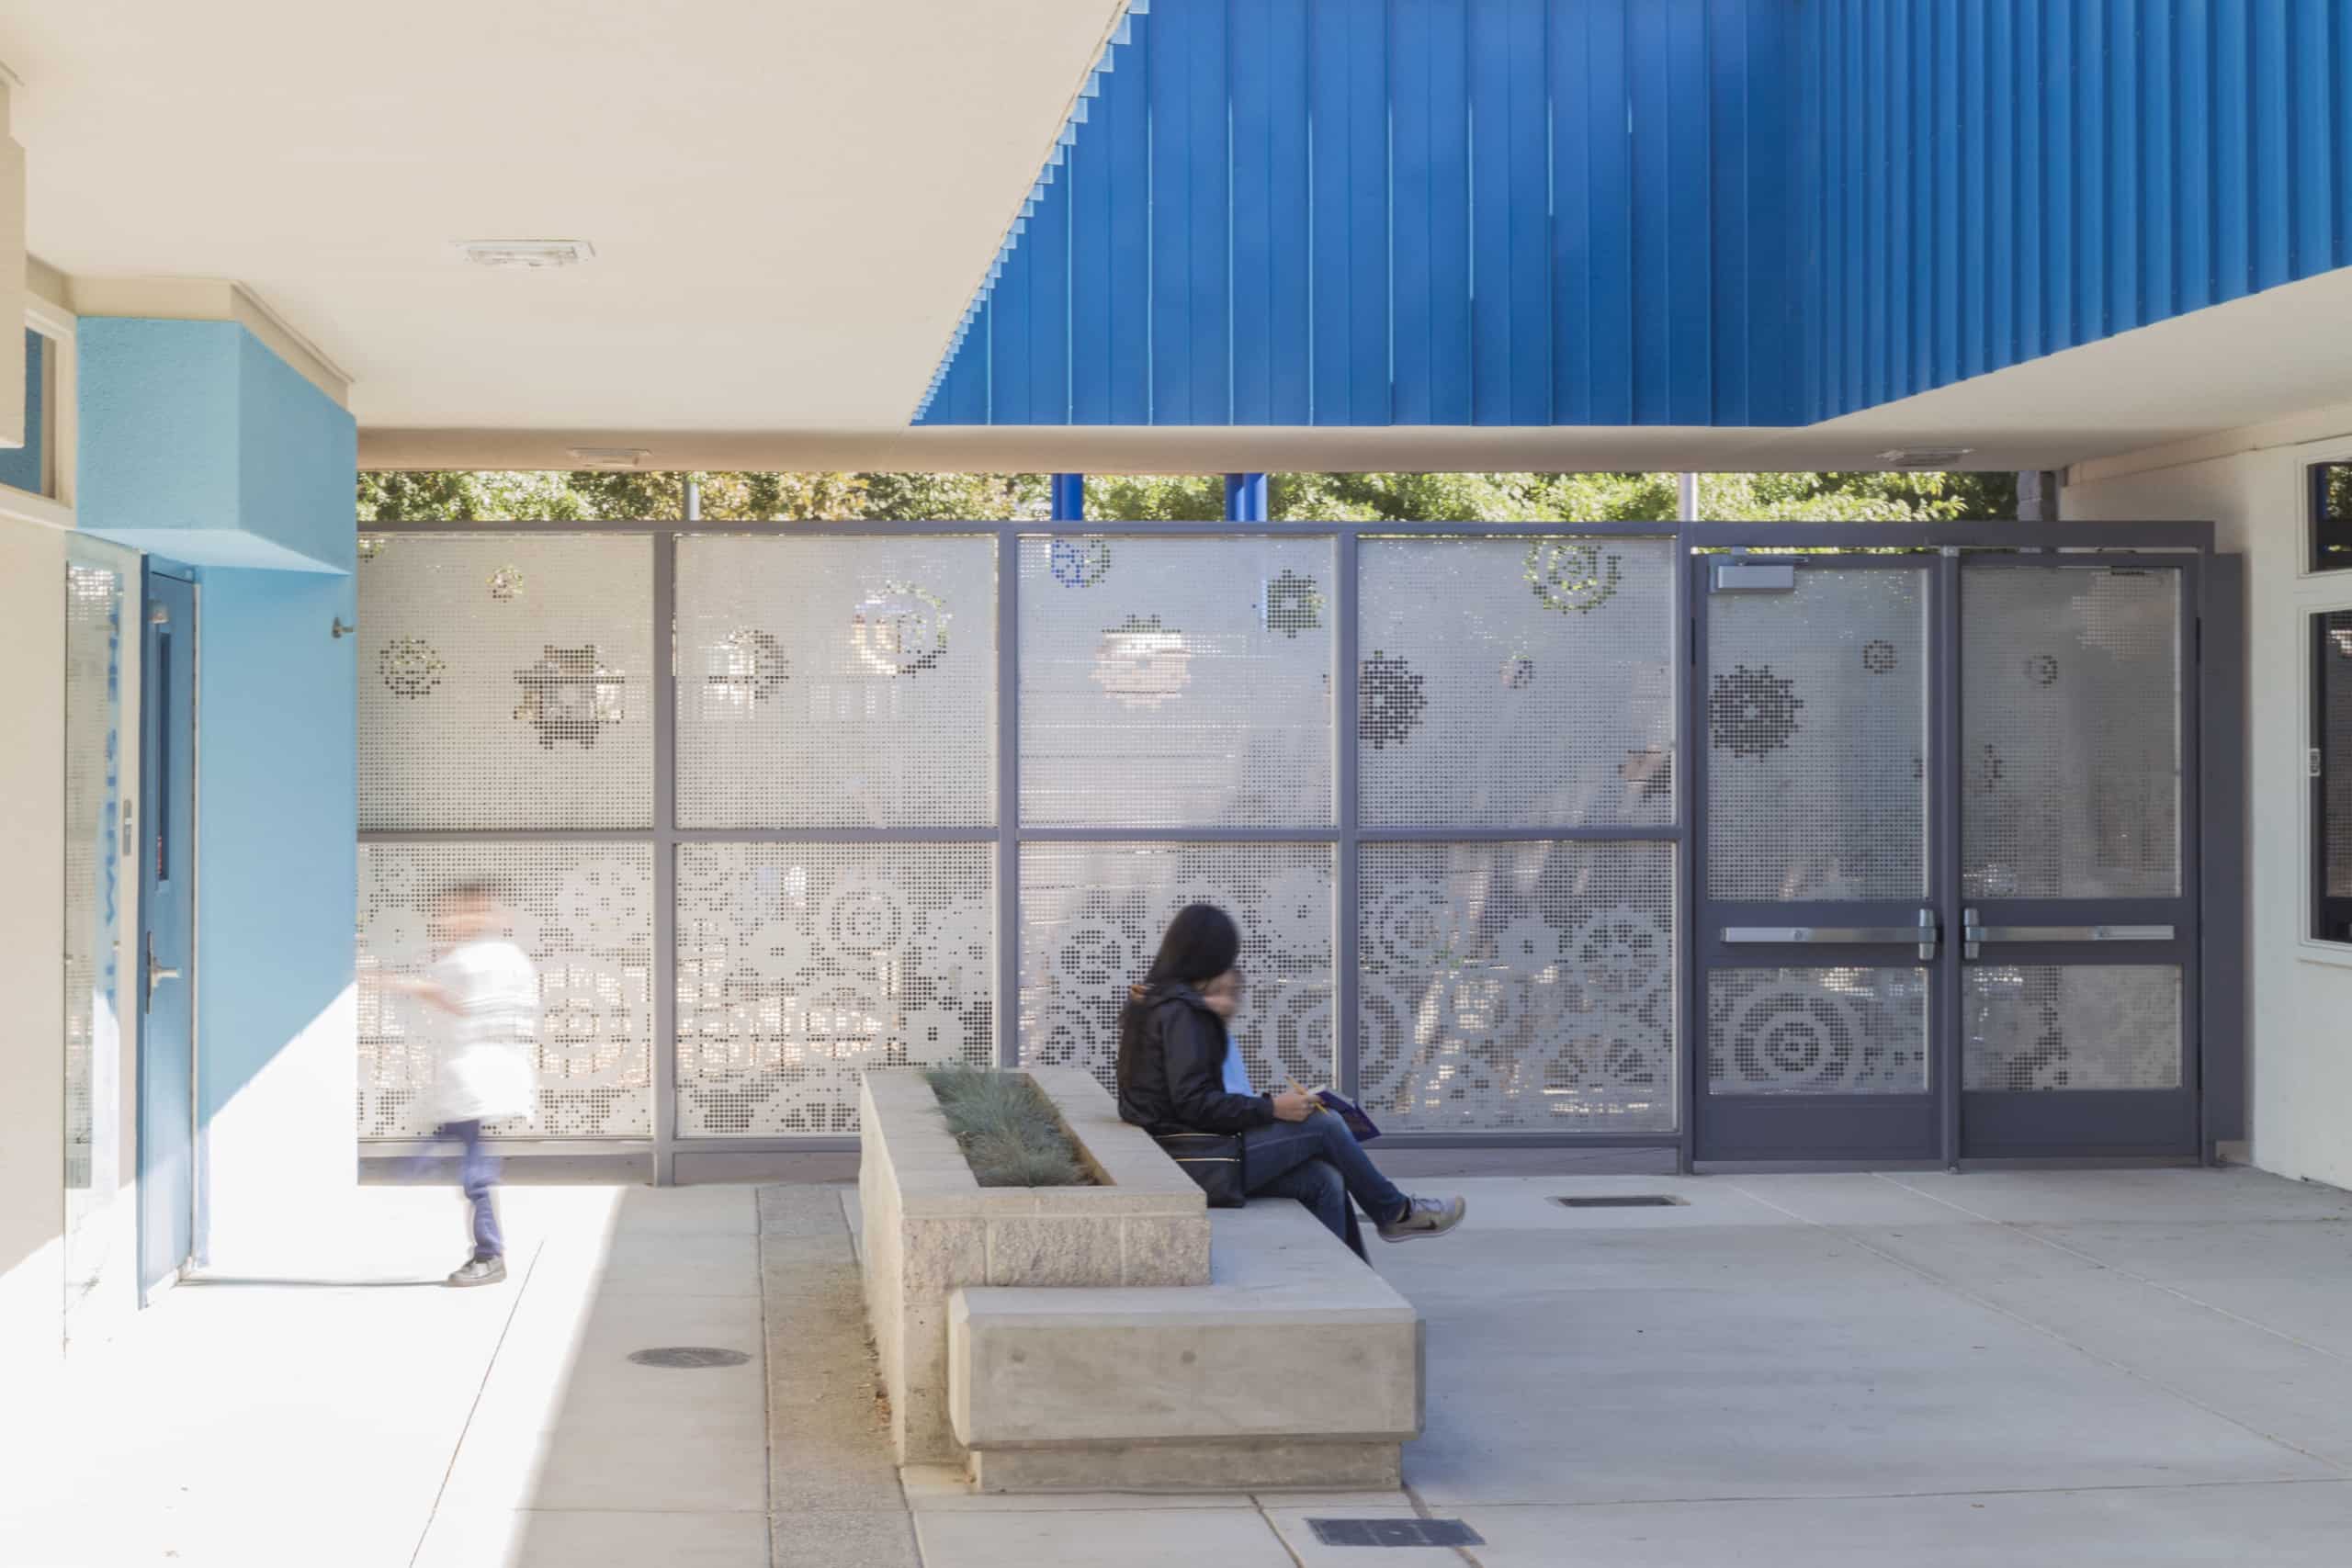 A perforated metal screen wall creates a private space for the courtyard at Washington Elementary.